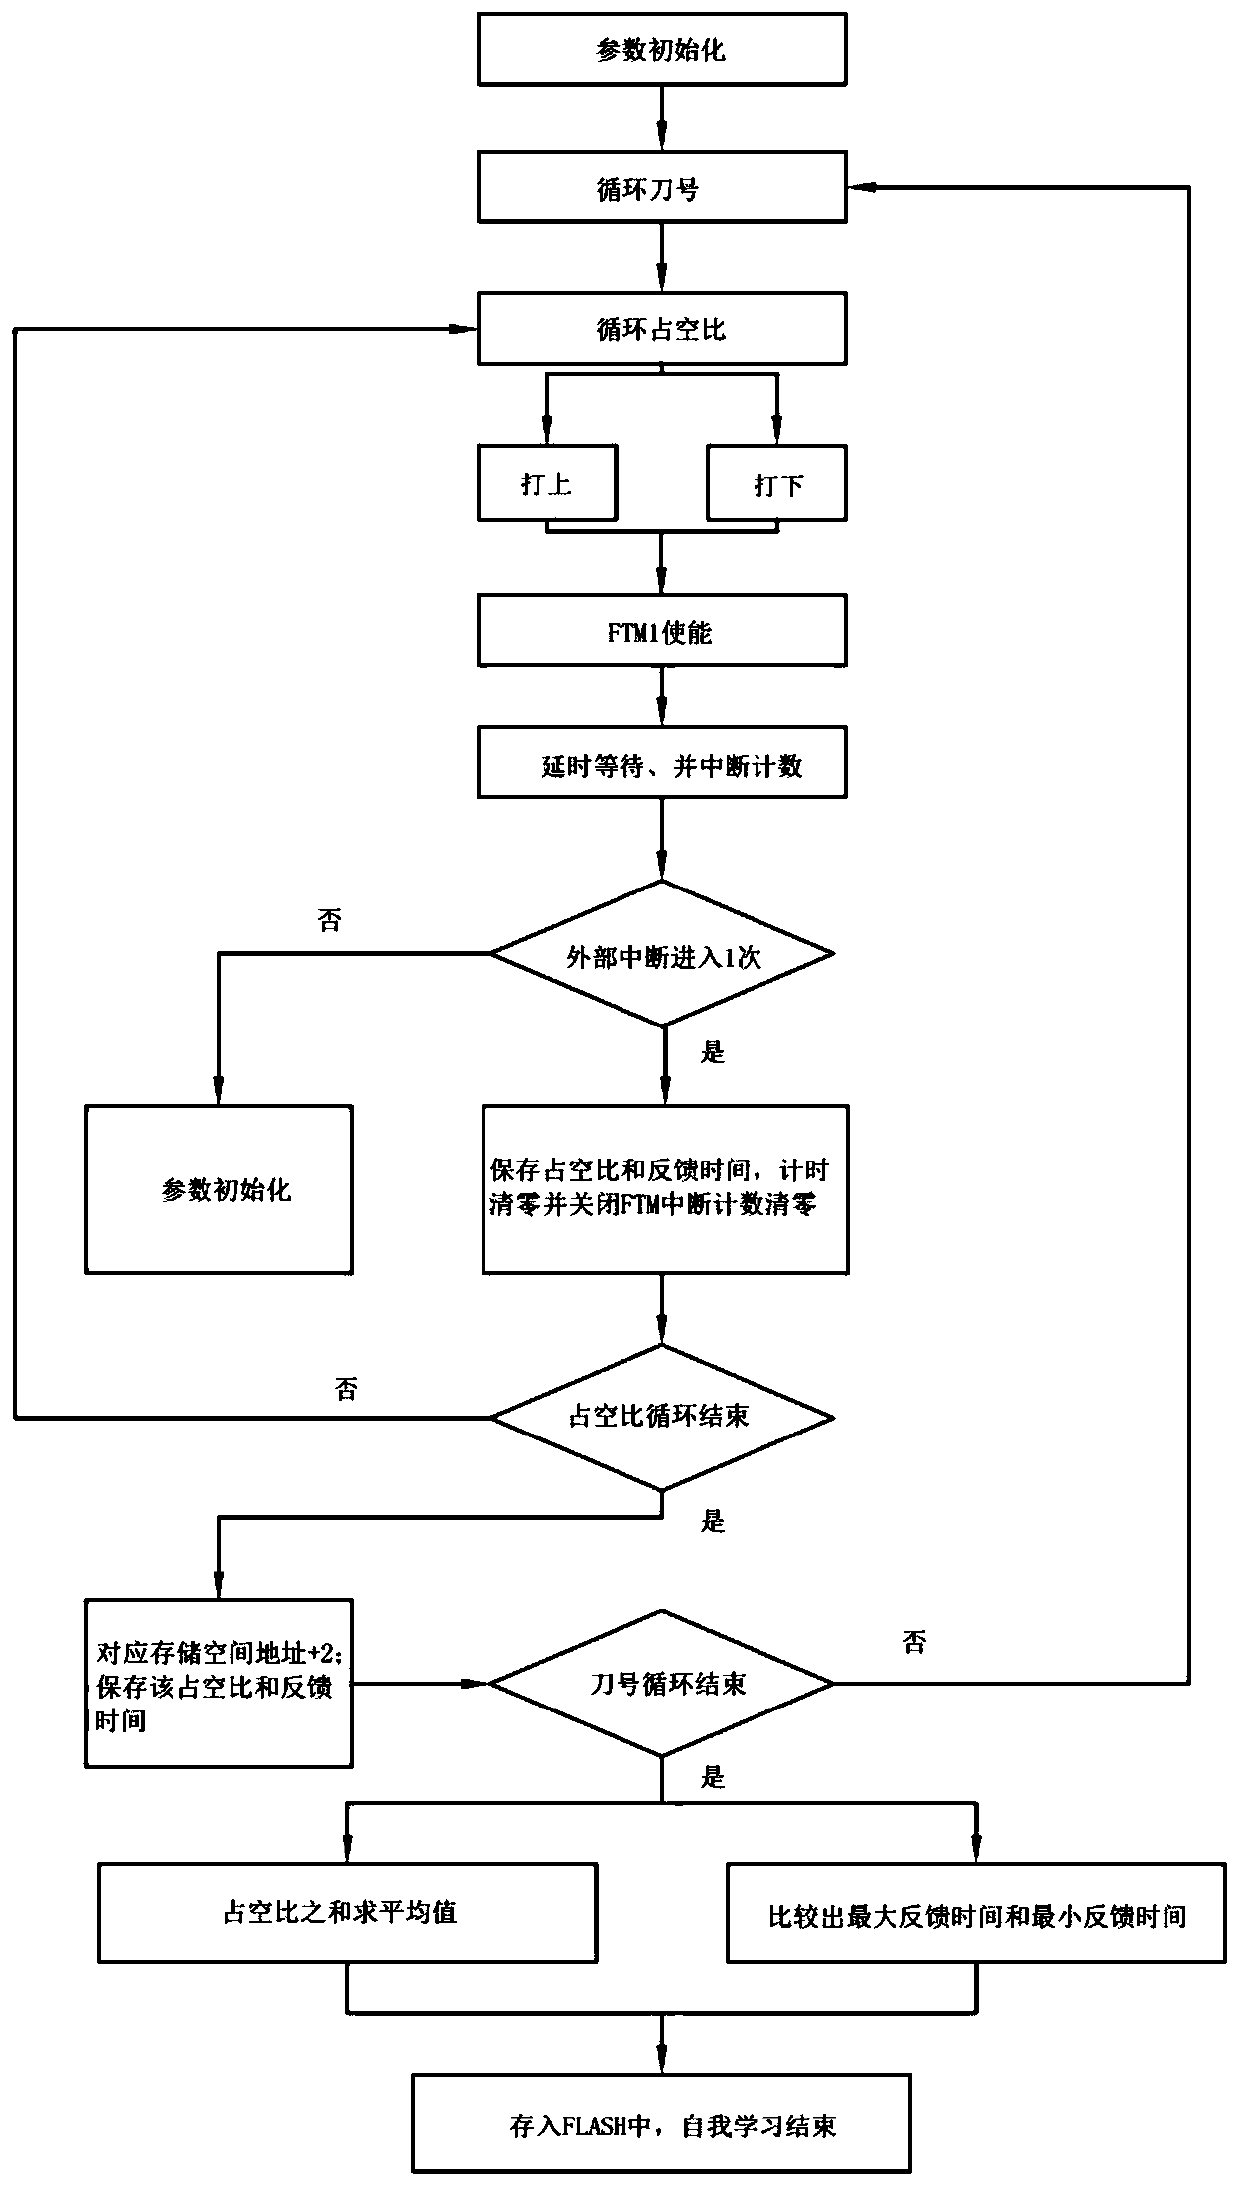 State inspection system and state inspection method